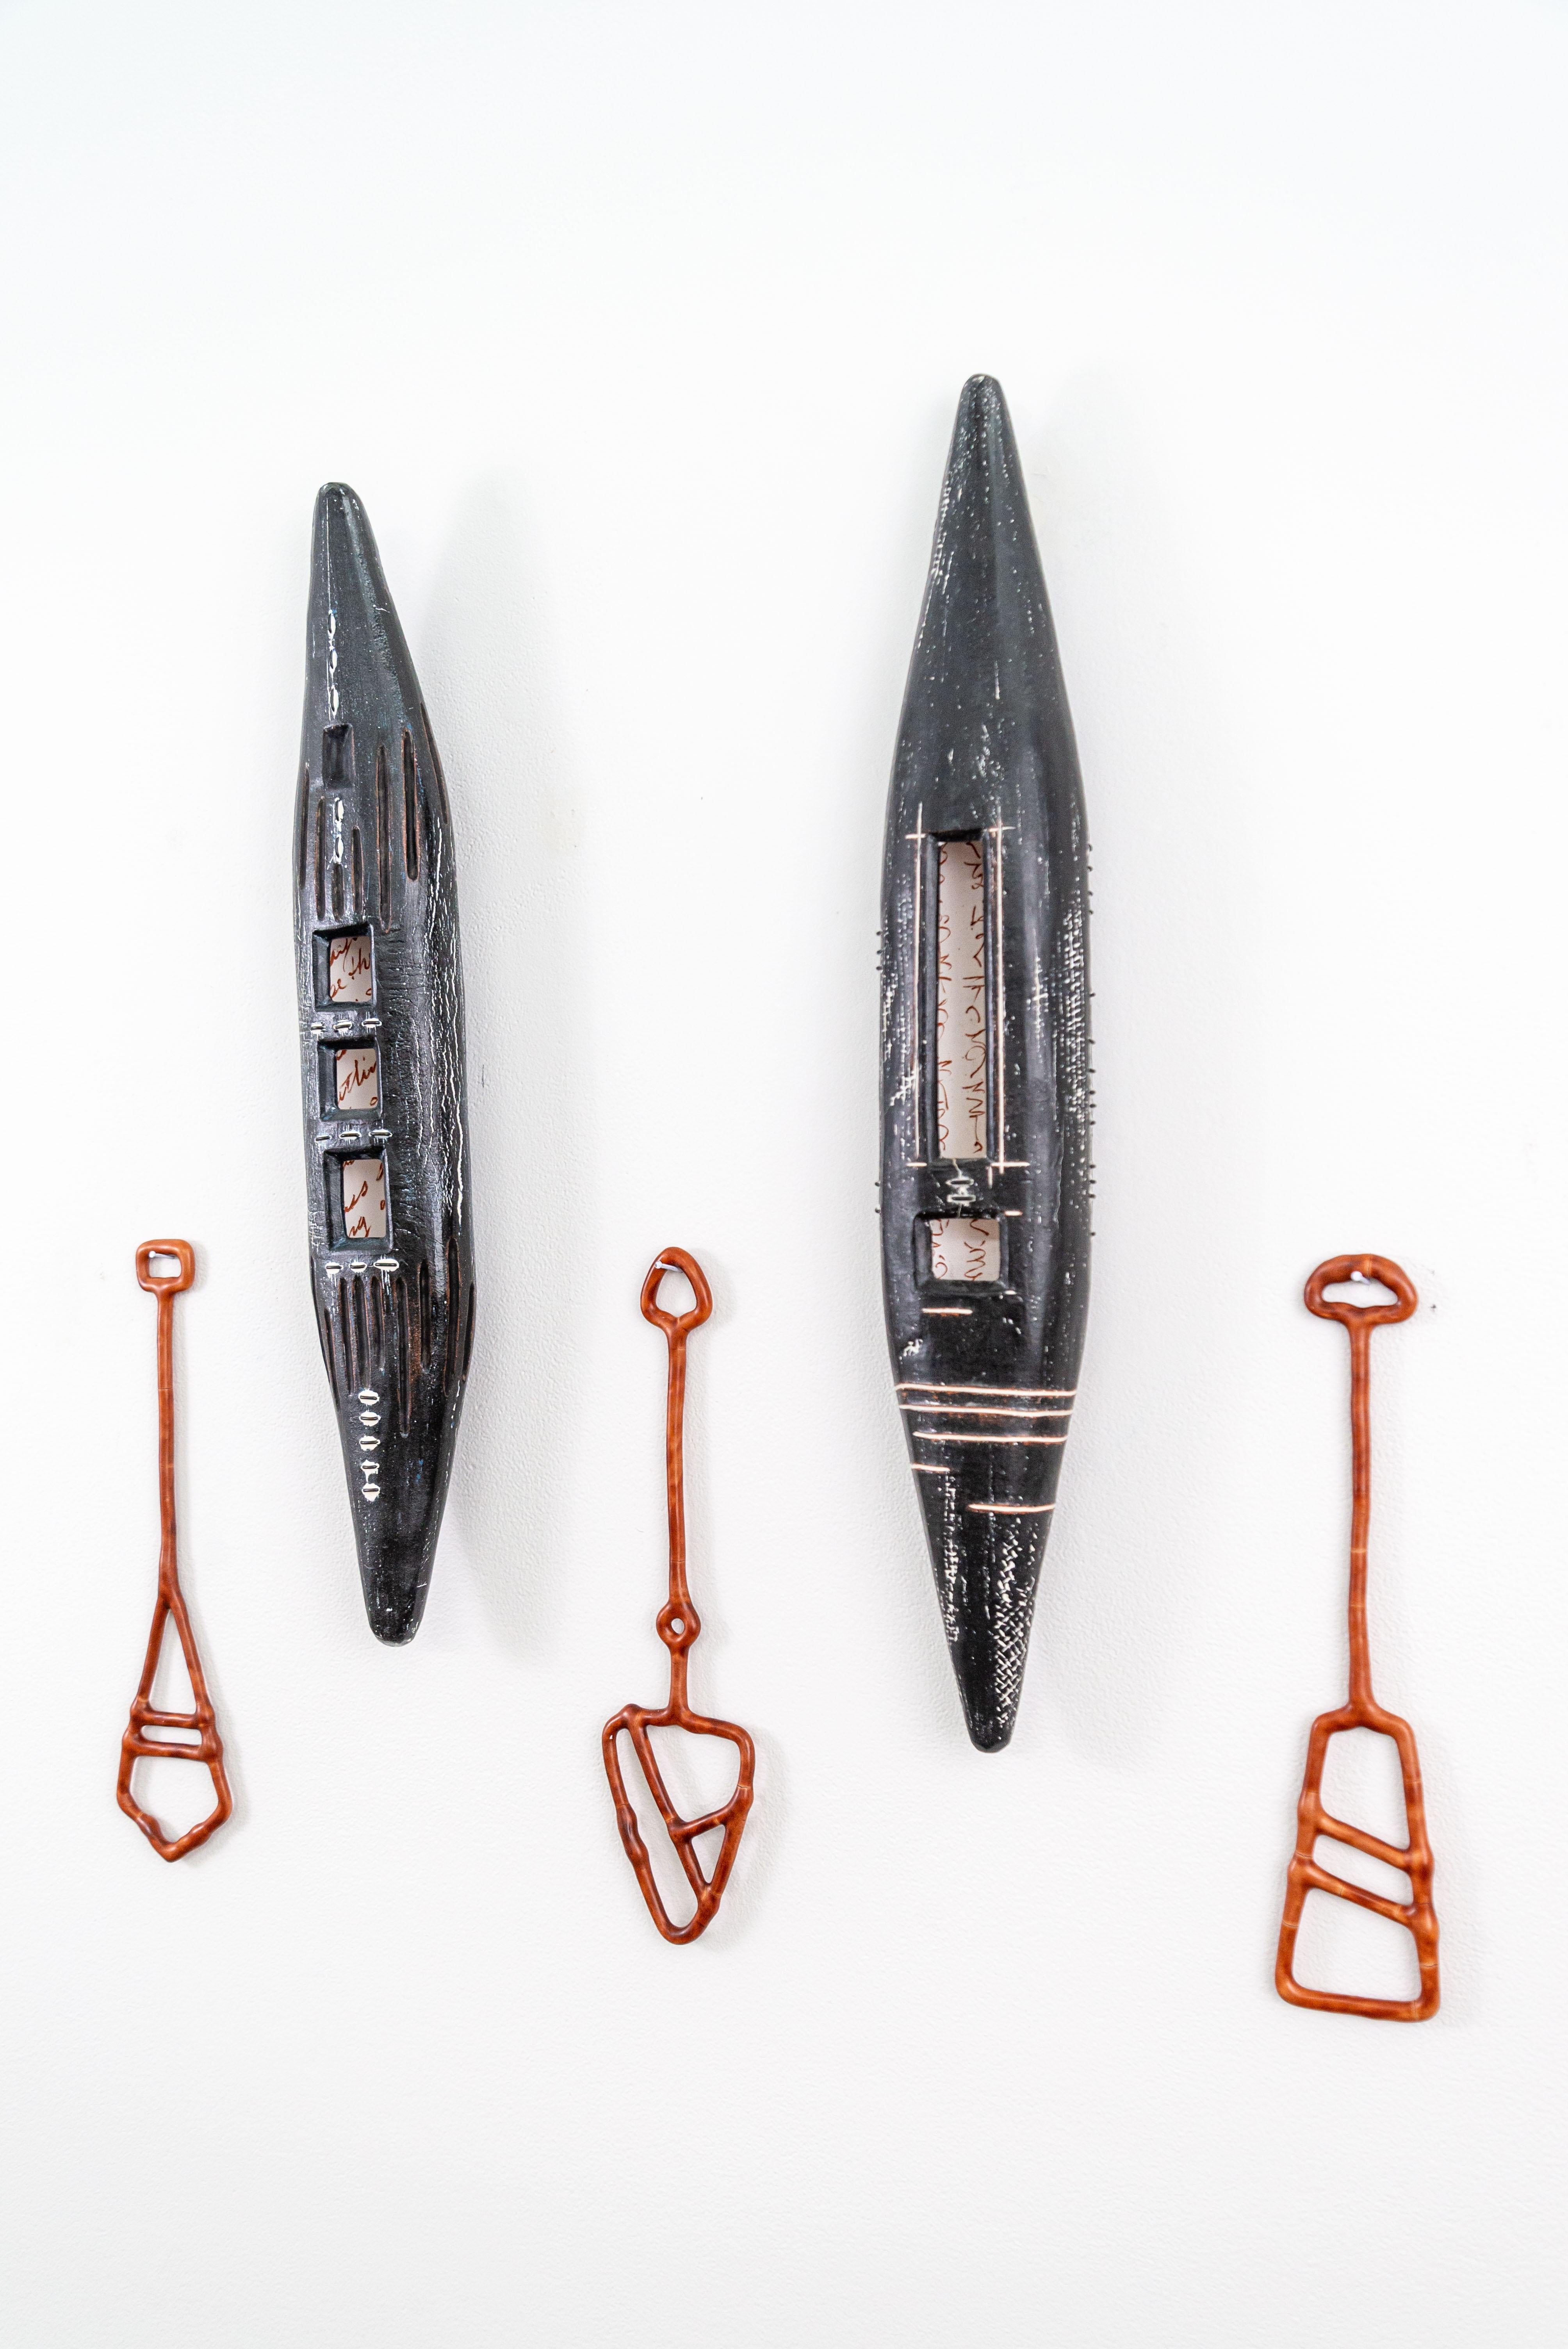 Heather Allen Hietala’s mixed media art is designed to tell a story. The American artist uses the vessel as a metaphor for life’s journey. Hietala hand-builds ceramic canoe-like shapes—this diptych (two pieces) rendered in black with white markings